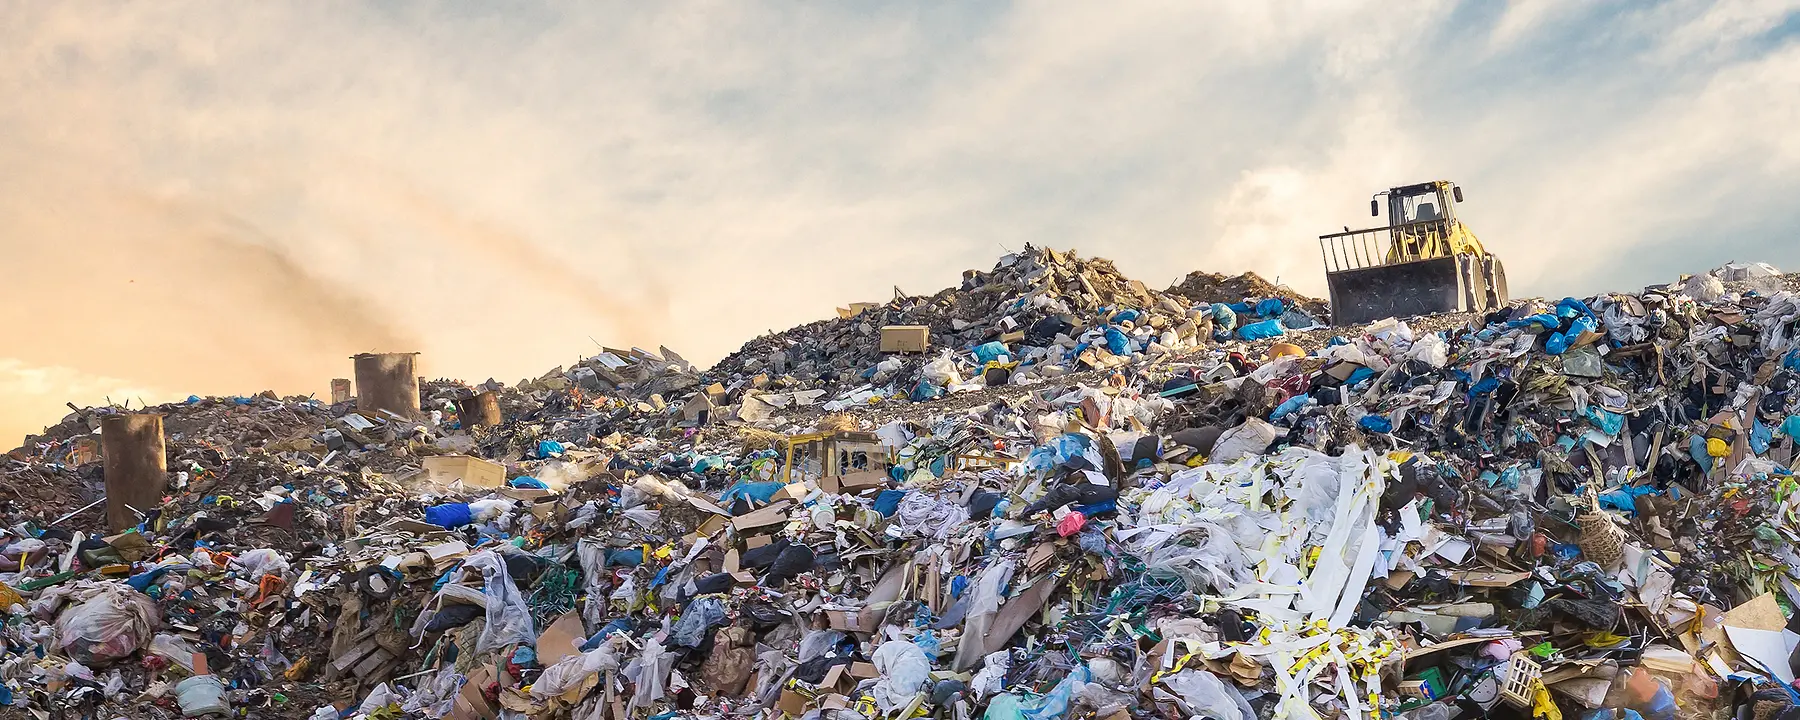 A bulldozer sits atop a heap of garbage in a large landfill.